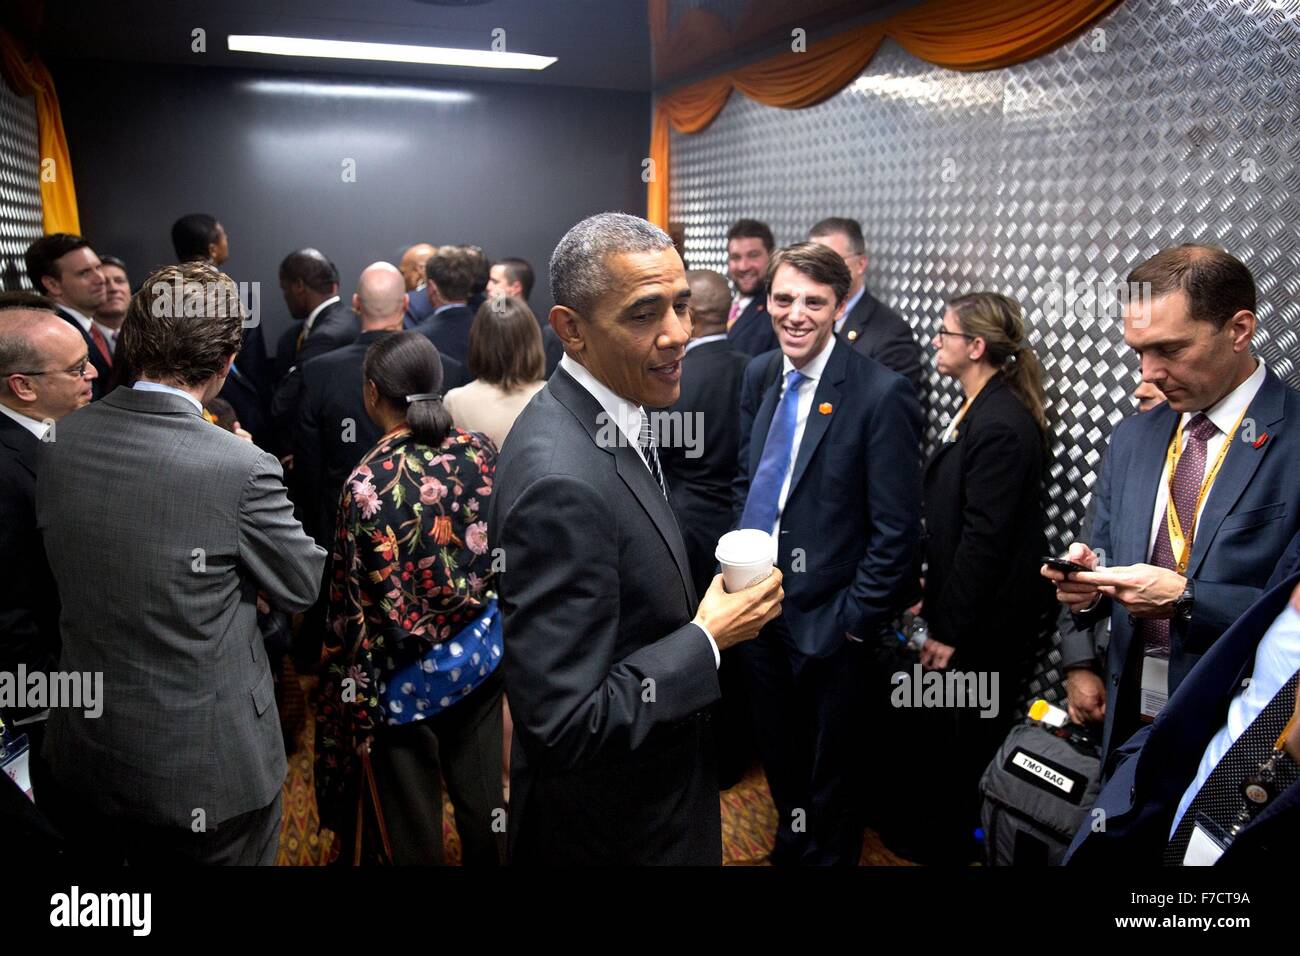 U.S. President Barack Obama rides the freight elevator with staff and Secret Service on his way to the Association of Southeast Asian Nation summit meeting November 22, 2015 in Kuala Lumpur, Malaysia. Stock Photo